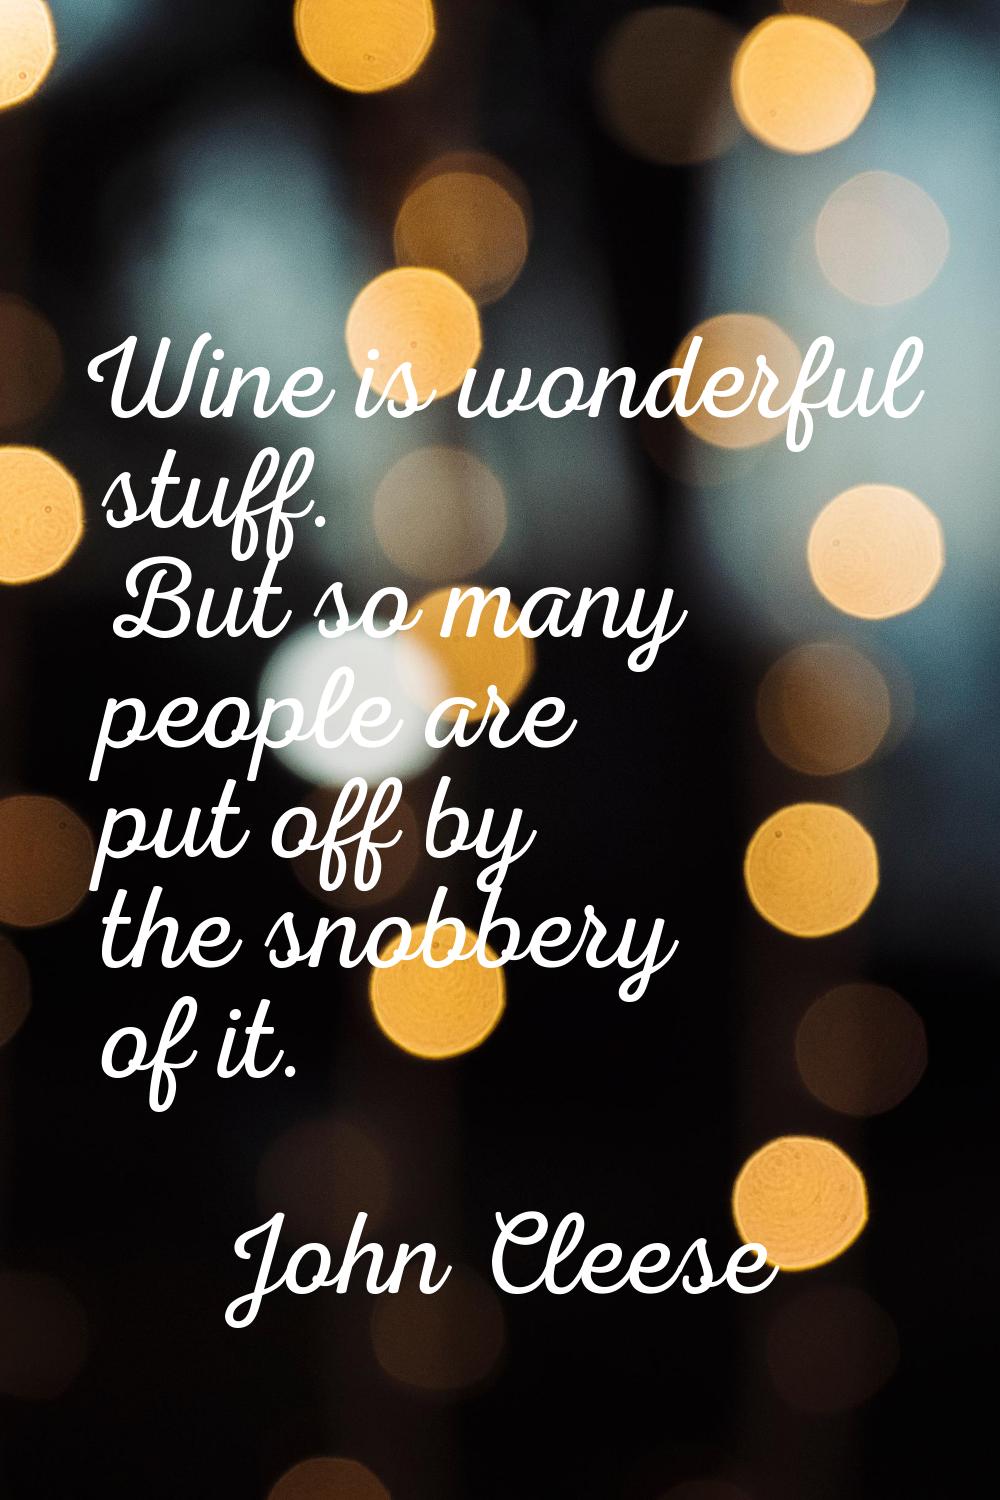 Wine is wonderful stuff. But so many people are put off by the snobbery of it.